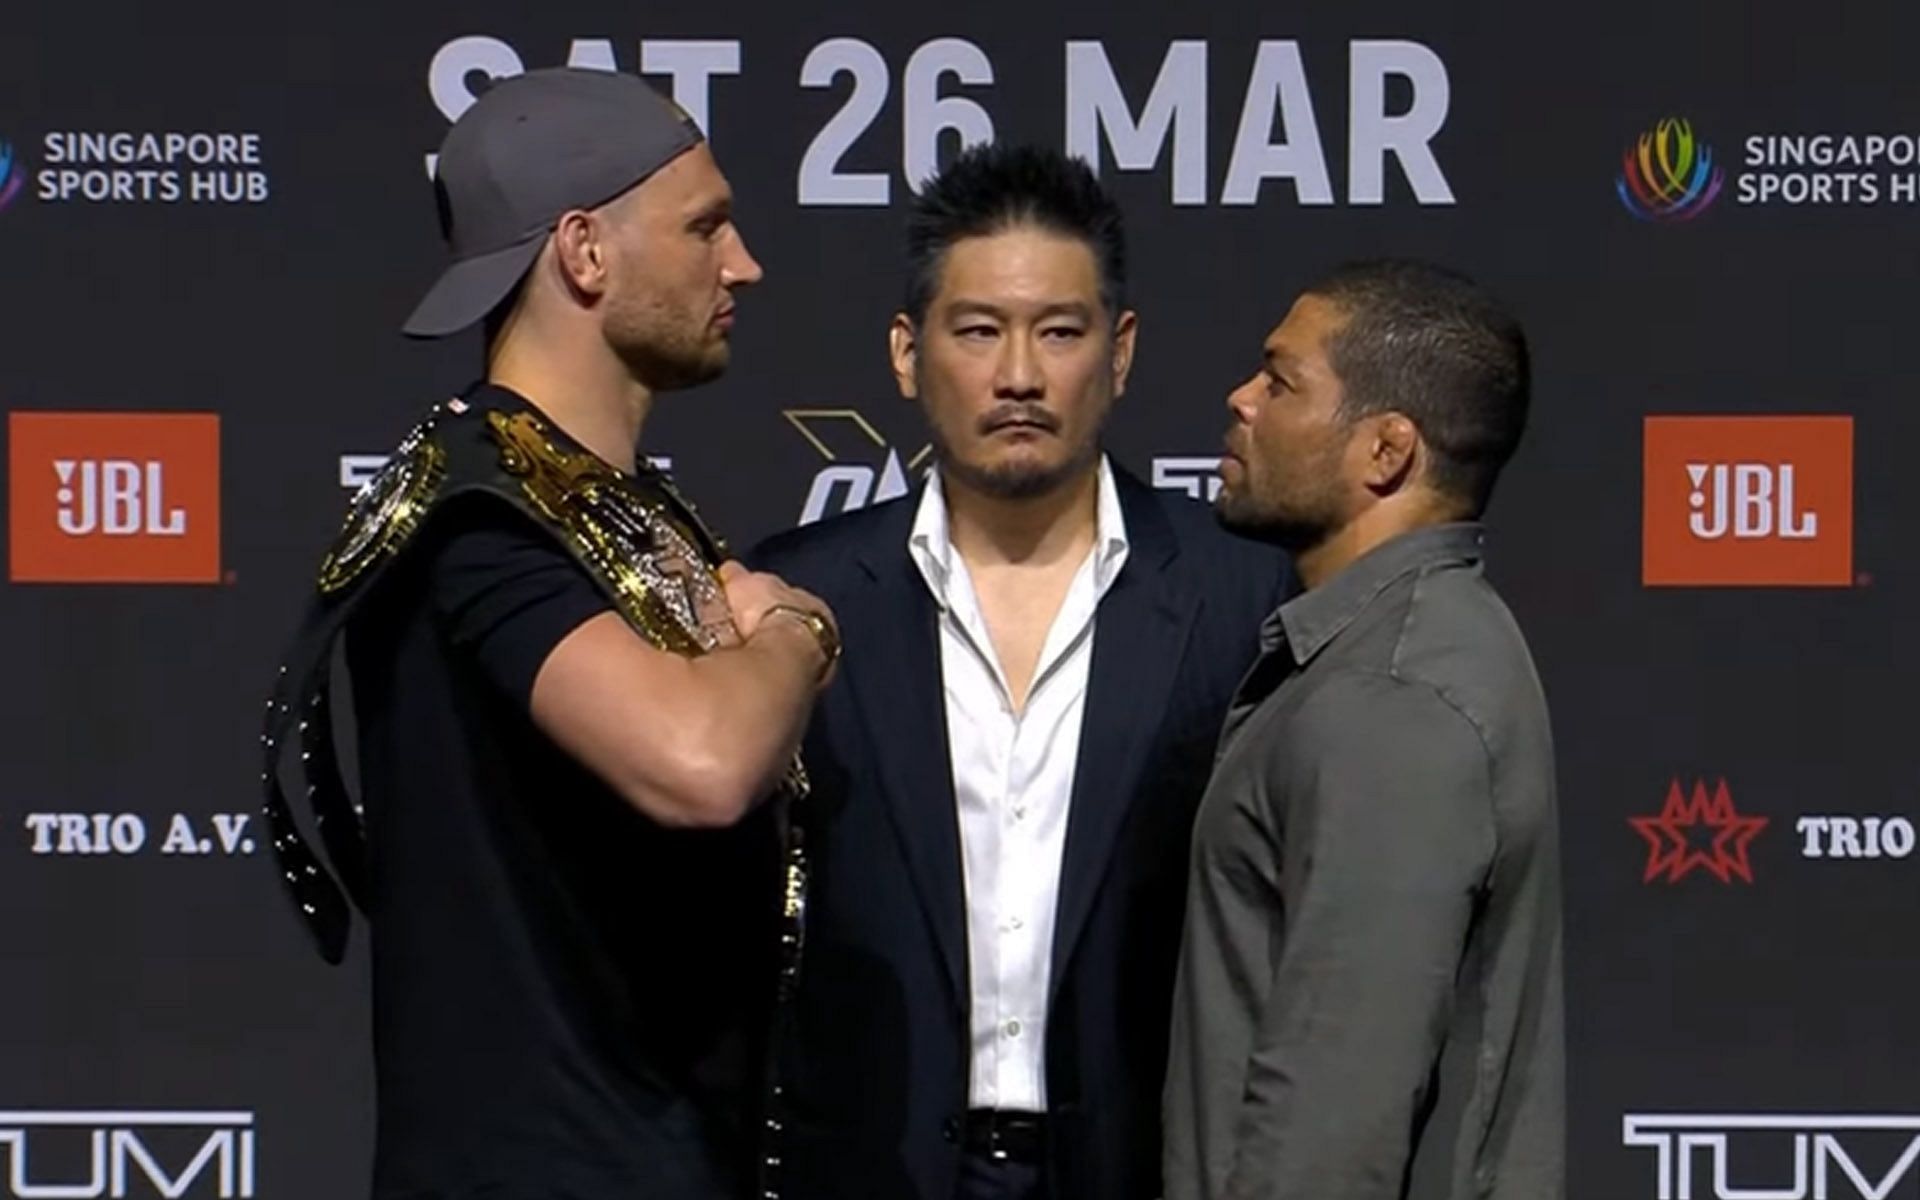 Reinier de Ridder (L) will test his grappling against Andre Galvao (R) at ONE X. | [Photo: ONE Championship]